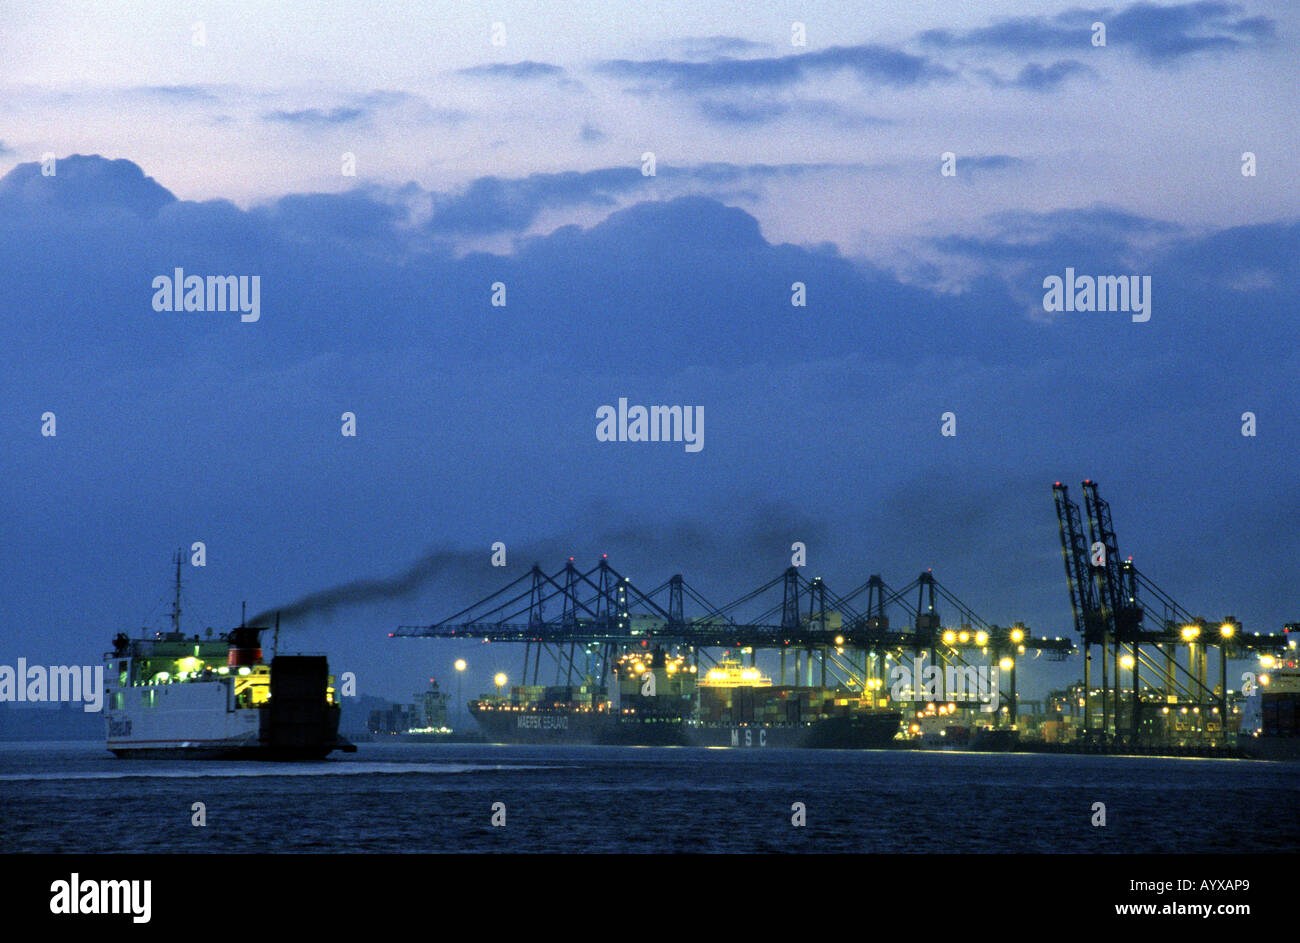 Trinity Quay at the Port of Felixstowe in Suffolk, Britain's largest container port. Stock Photo